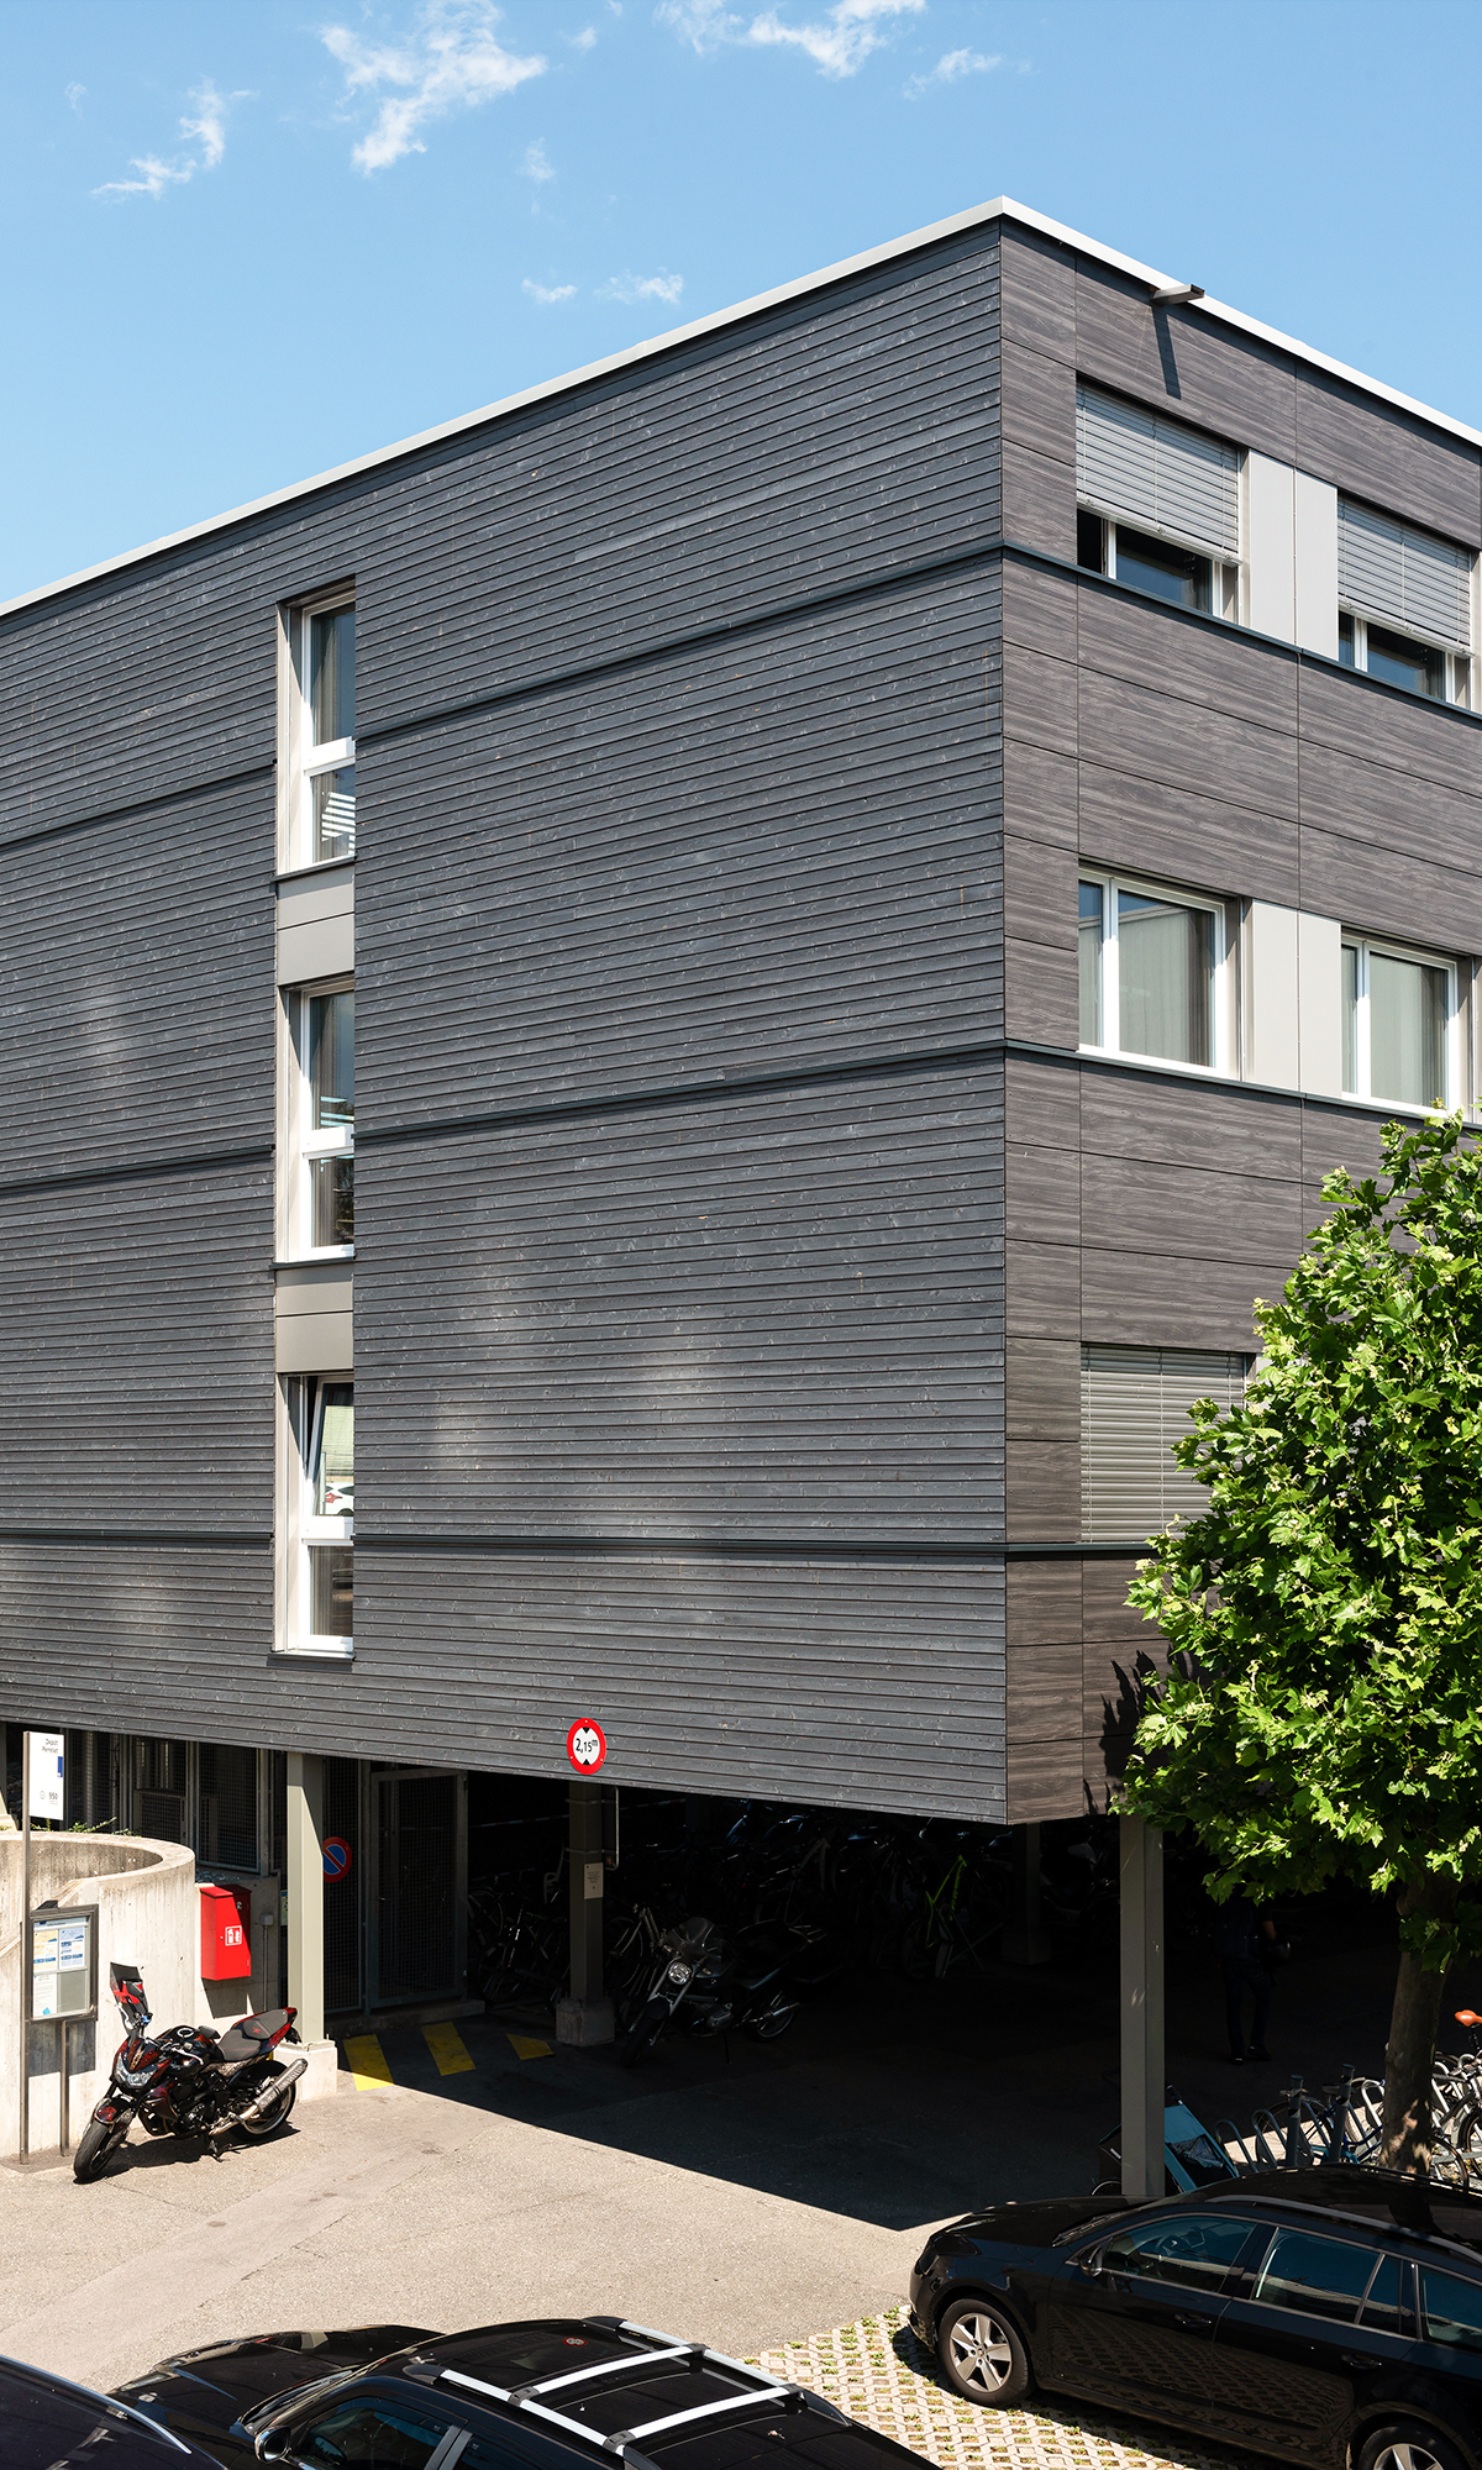 Three-storey modular construction with a dark timber facade seen from the side